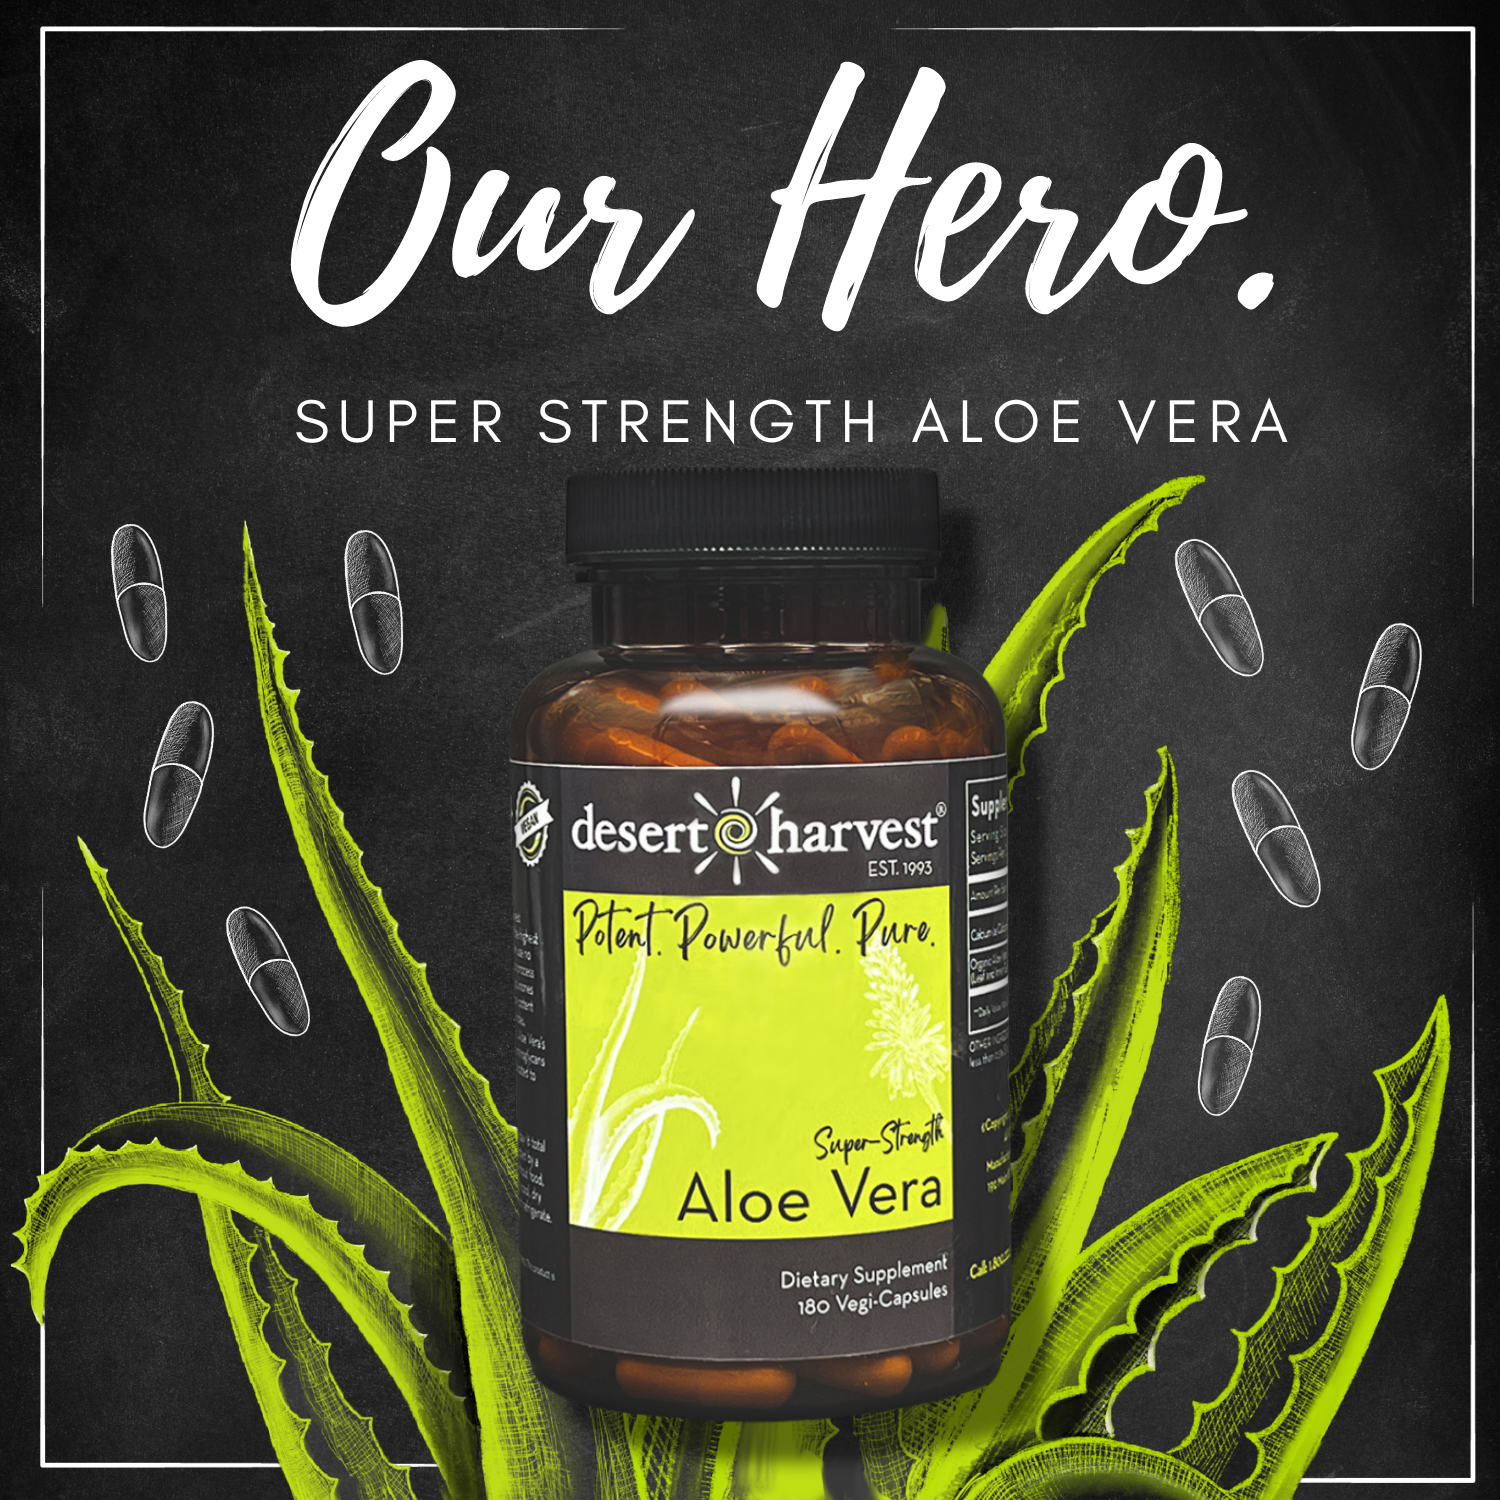 Image of Desert Harvest Super-Strength Aloe Vera Capsules with a drawing of aloe vera in background "Our Hero, Super-Strength Aloe Vera"